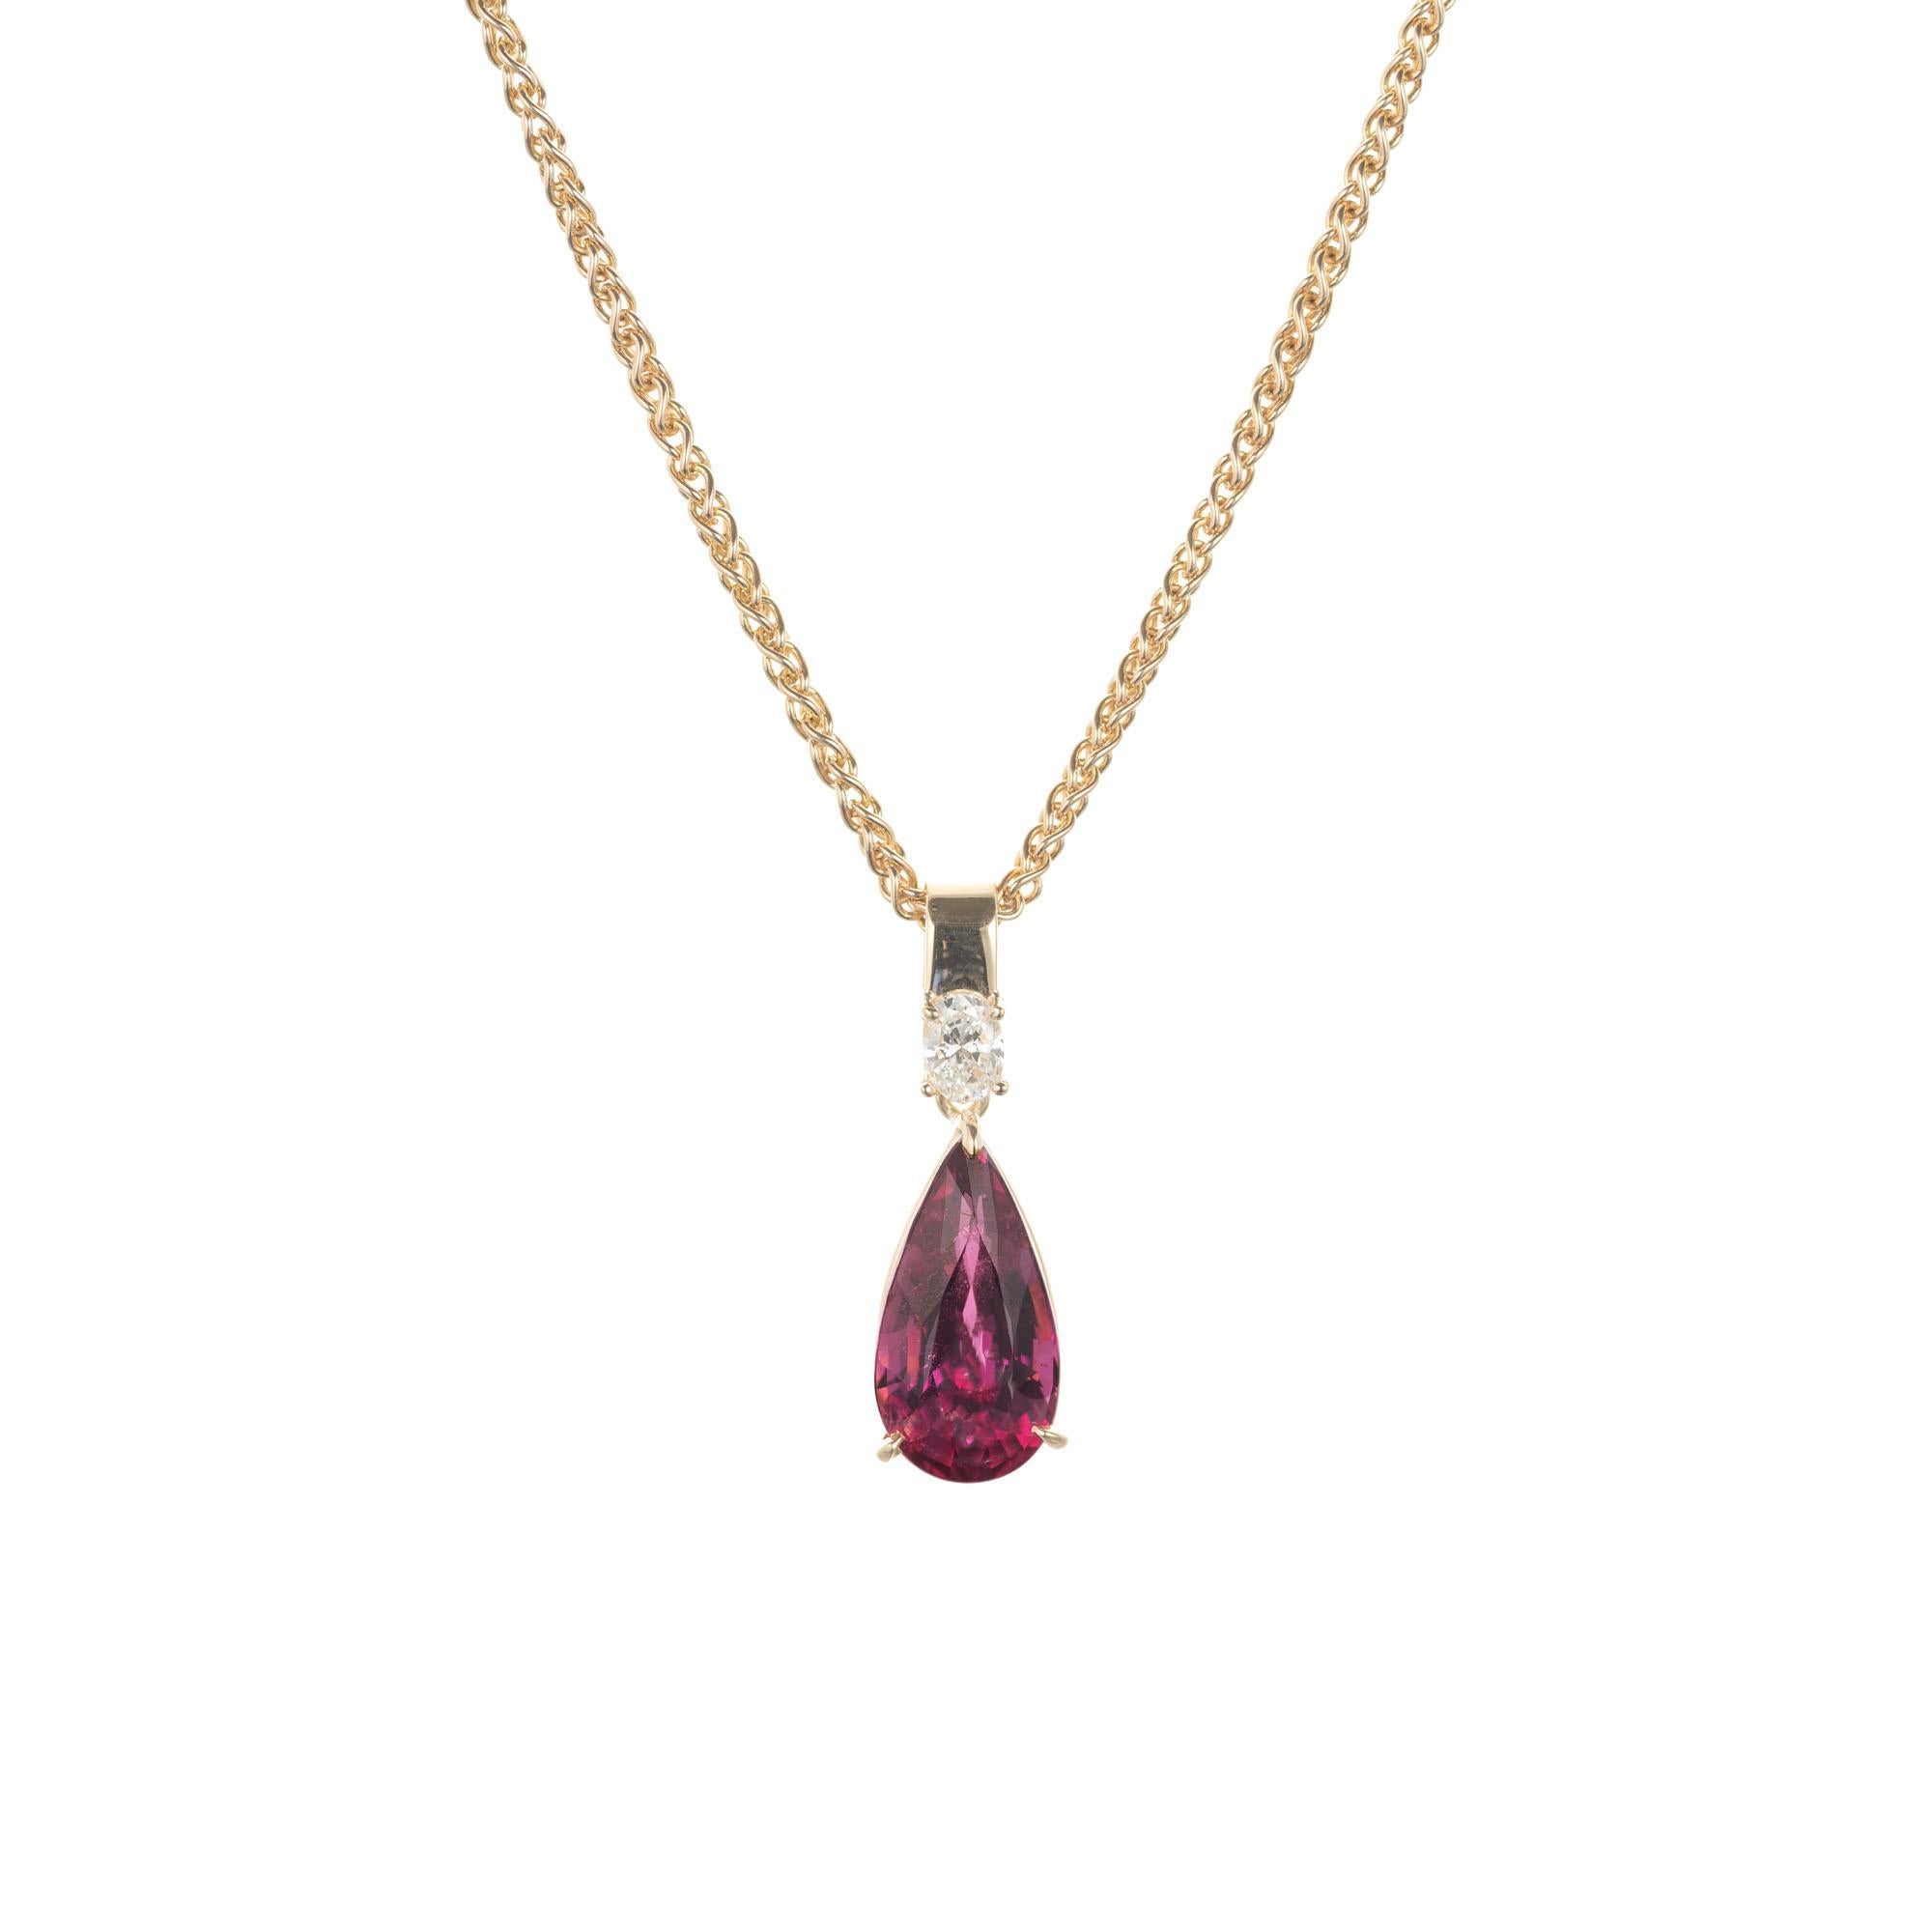 Pink tourmaline and diamond pendant necklace. Pear shaped pink tourmaline, accented with oval diamond. 14k yellow gold. Crafted in the Peter Suchy Workshop. 

1 pear shape pink SI tourmaline, Approximate 4.74ct
1 oval I SI2 diamond, Approximate